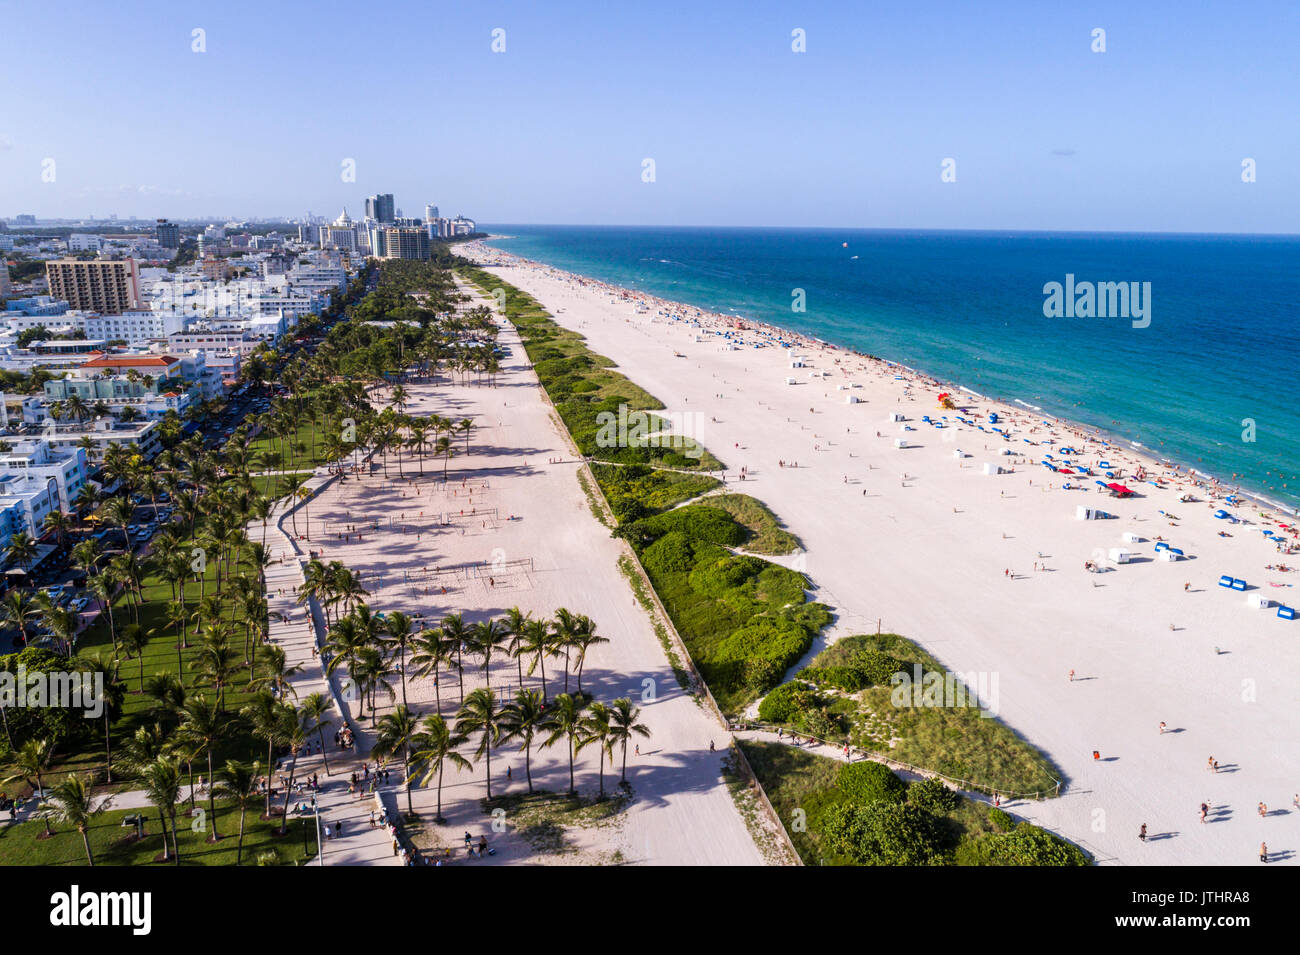 Miami Beach Florida,aerial overhead from above view,above,from above view,Atlantic Ocean,sand,sunbathers,Lummus Park,Ocean Drive,FL17080602d Stock Photo